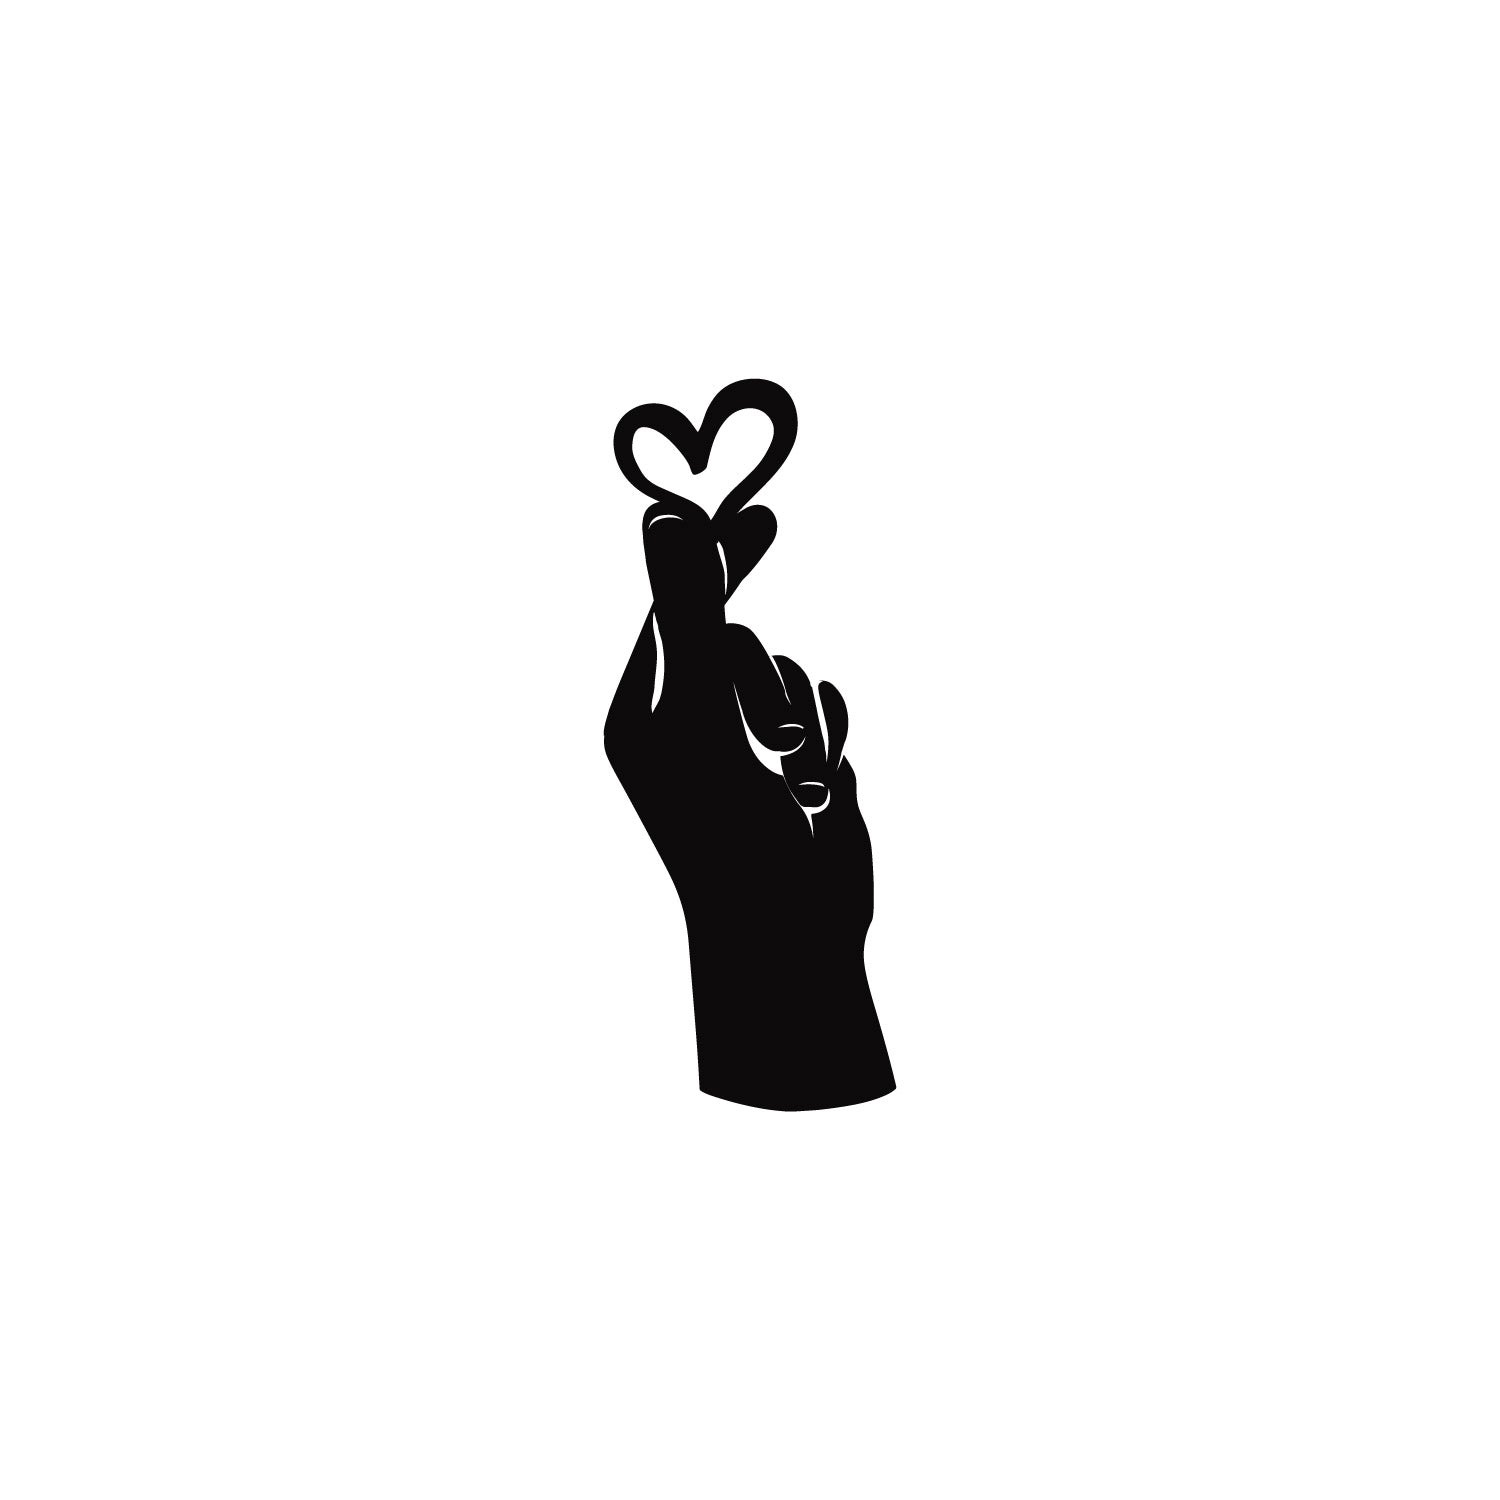 "Little Heart in Hand" Love Theme Black Engineered Wood Wall Art Cutout, Ready to Hang Home Decor 2